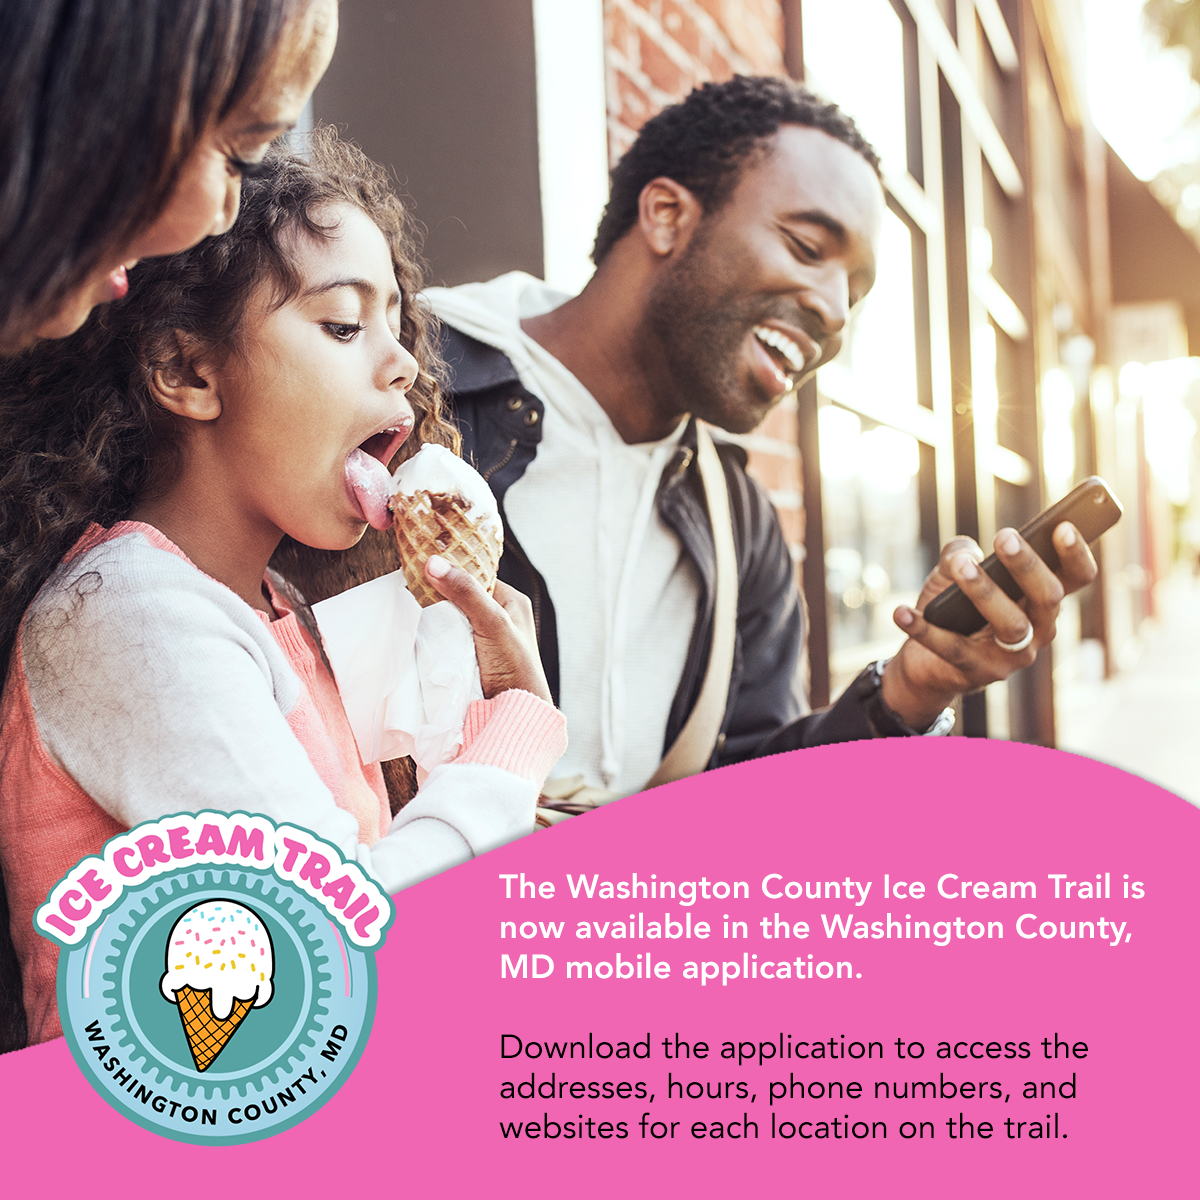 The Washington County Ice Cream Trail is now available in the Washington County, MD mobile application